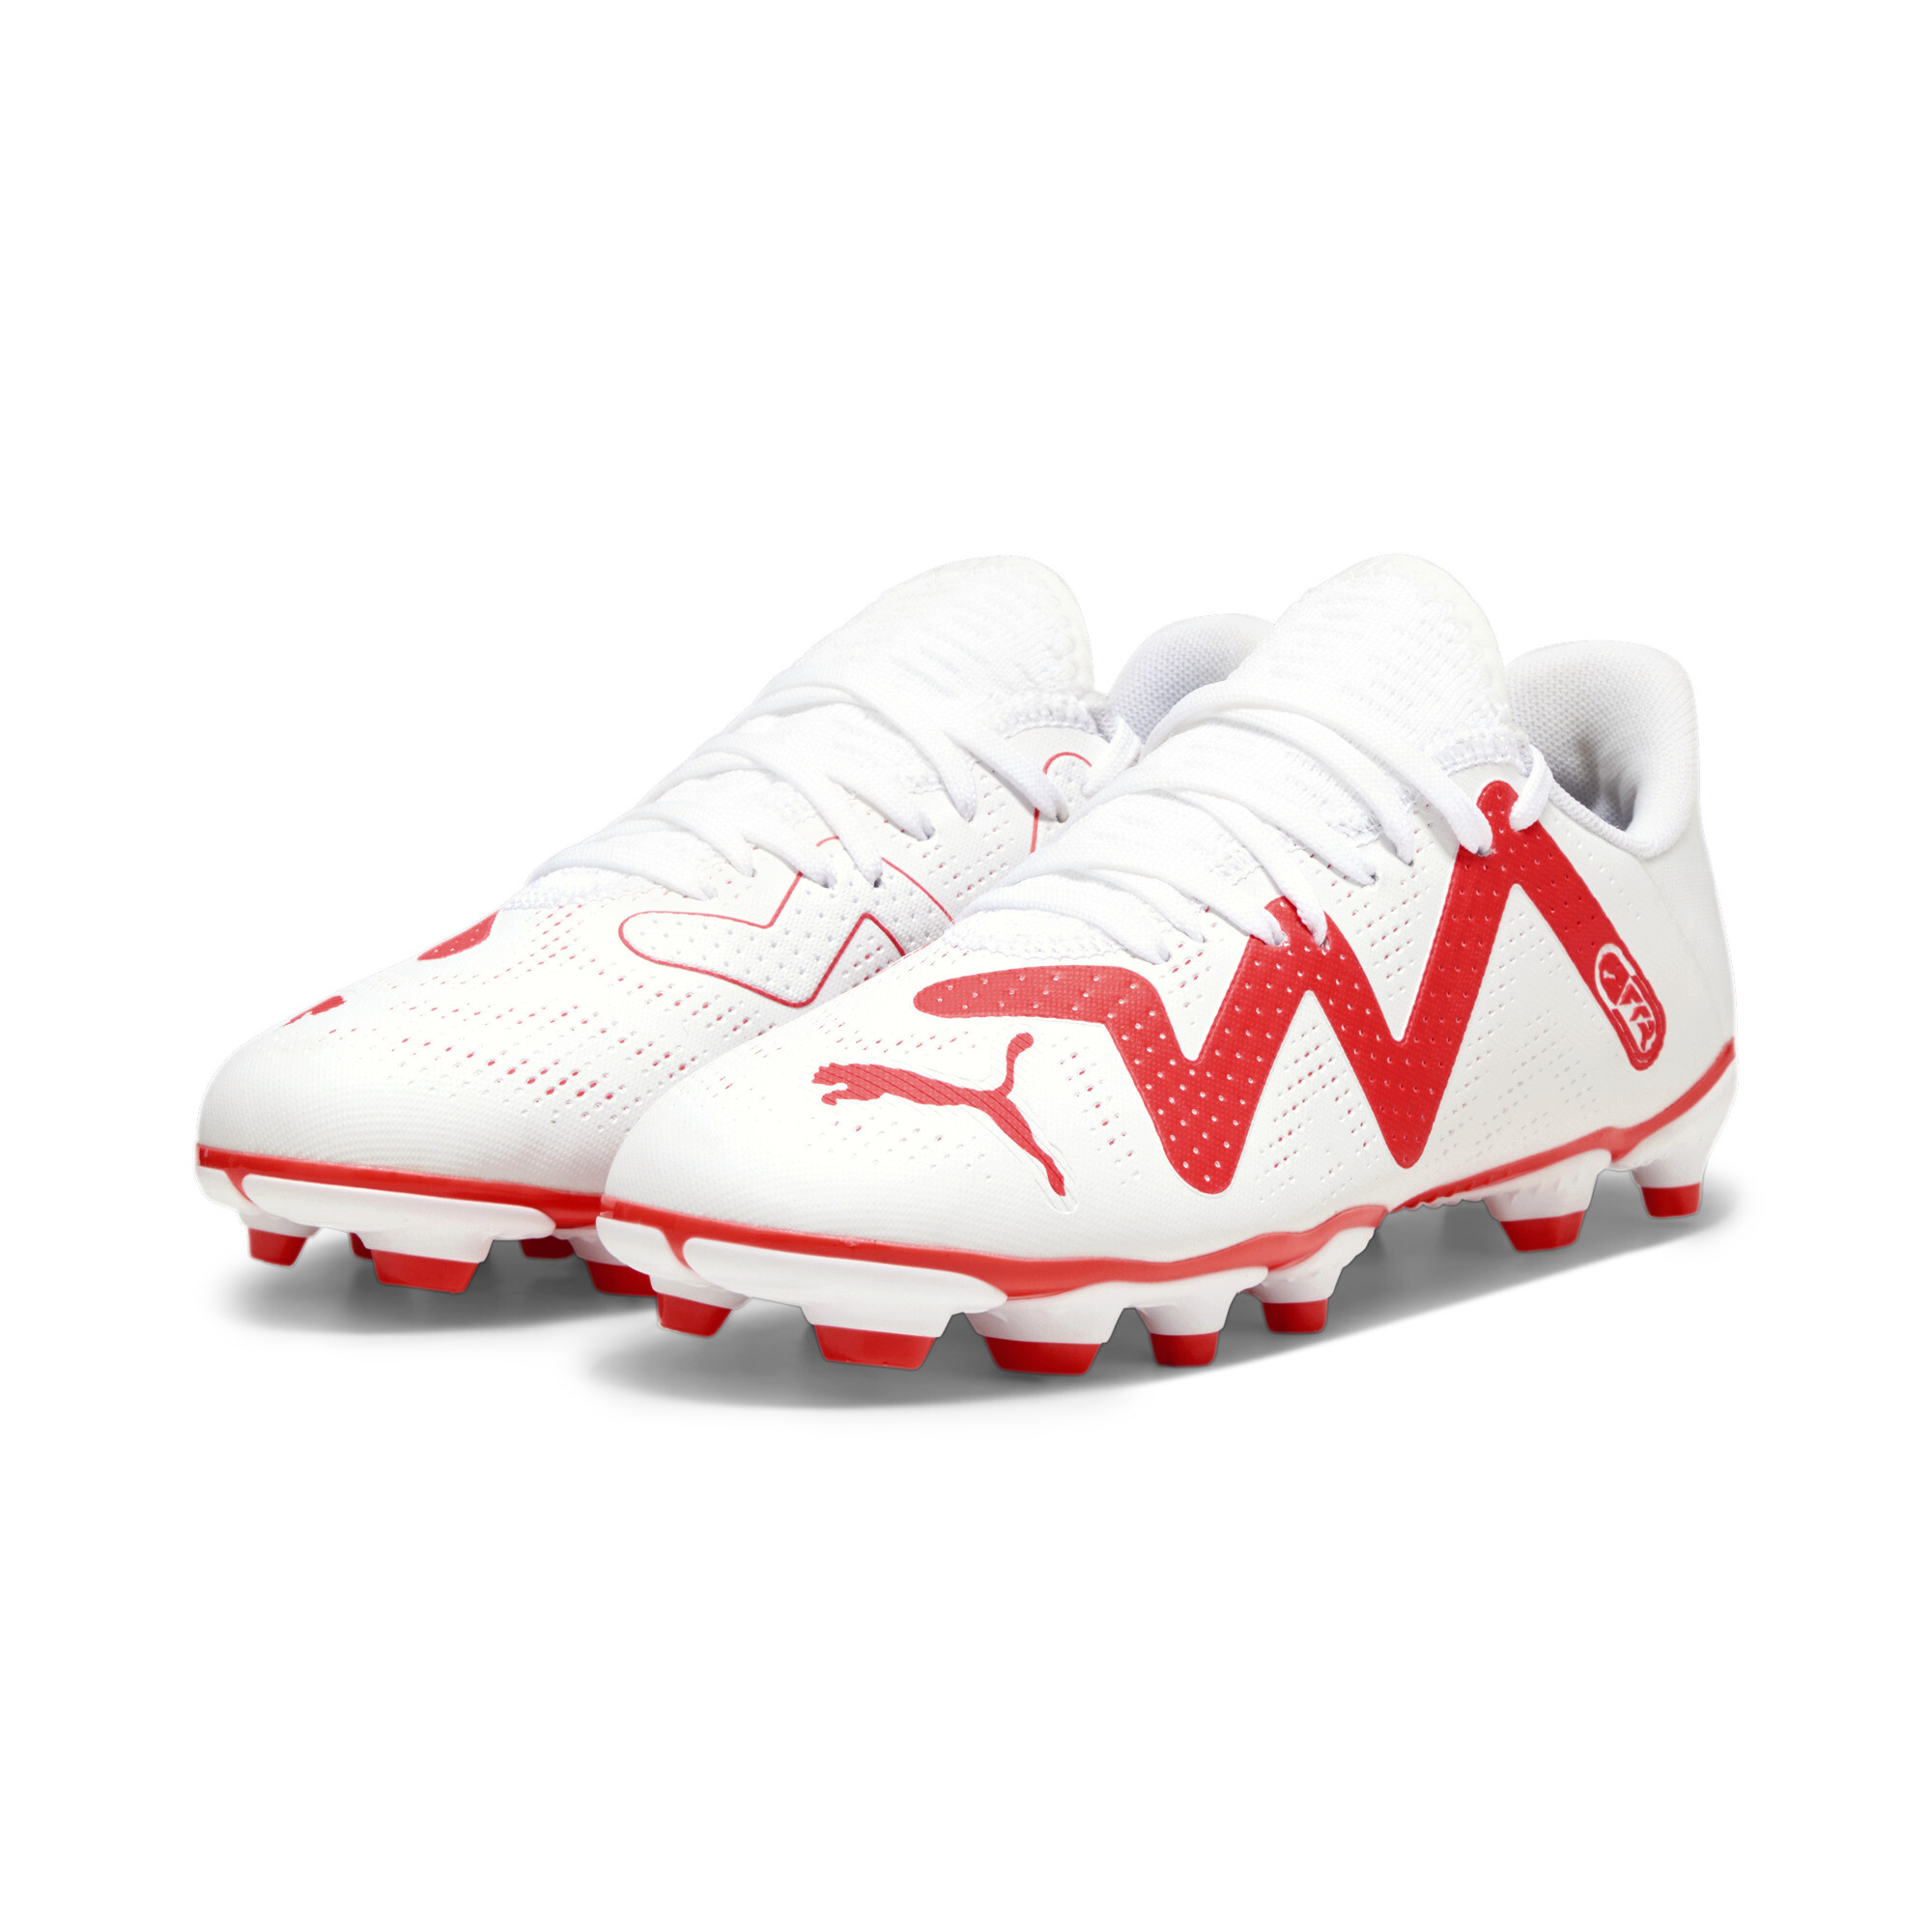 Puma FUTURE PLAY FG/AG Youth Football Boots, White, Size 32, Shoes